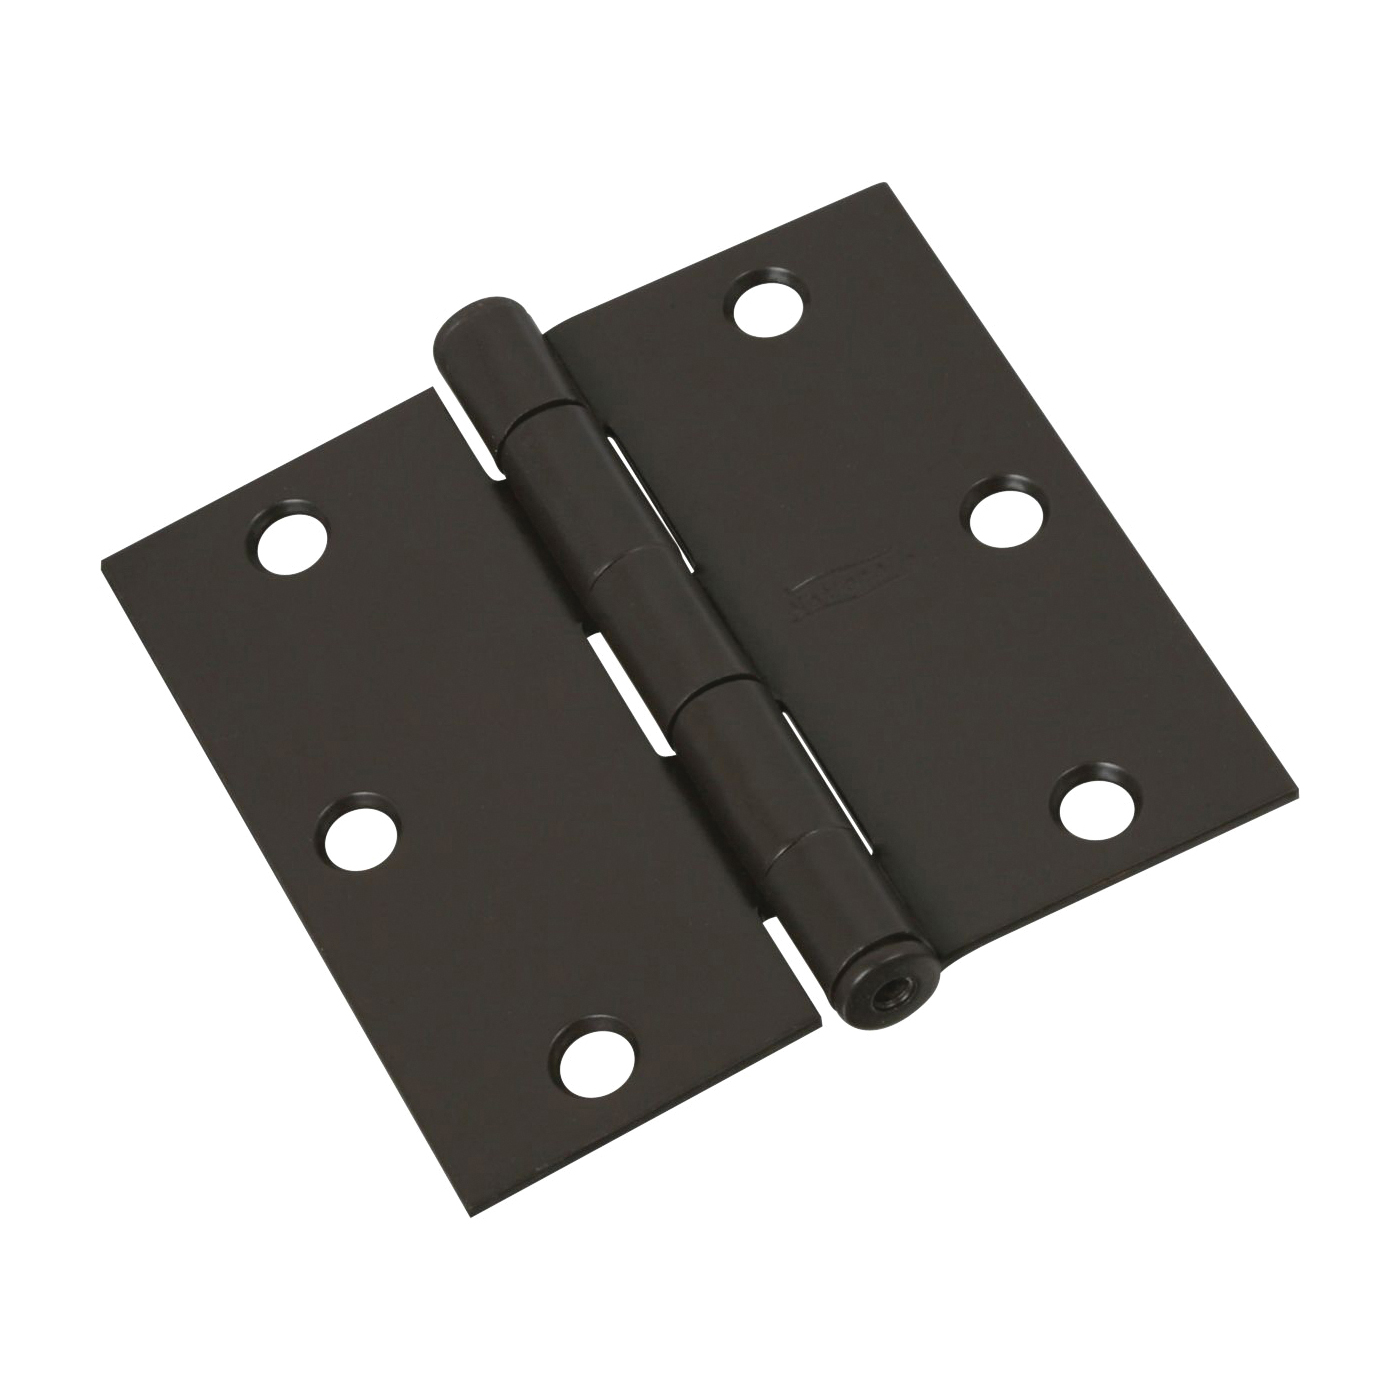 N830-323 Square Corner Door Hinge, Cold Rolled Steel, Oil-Rubbed Bronze, Full-Mortise Mounting